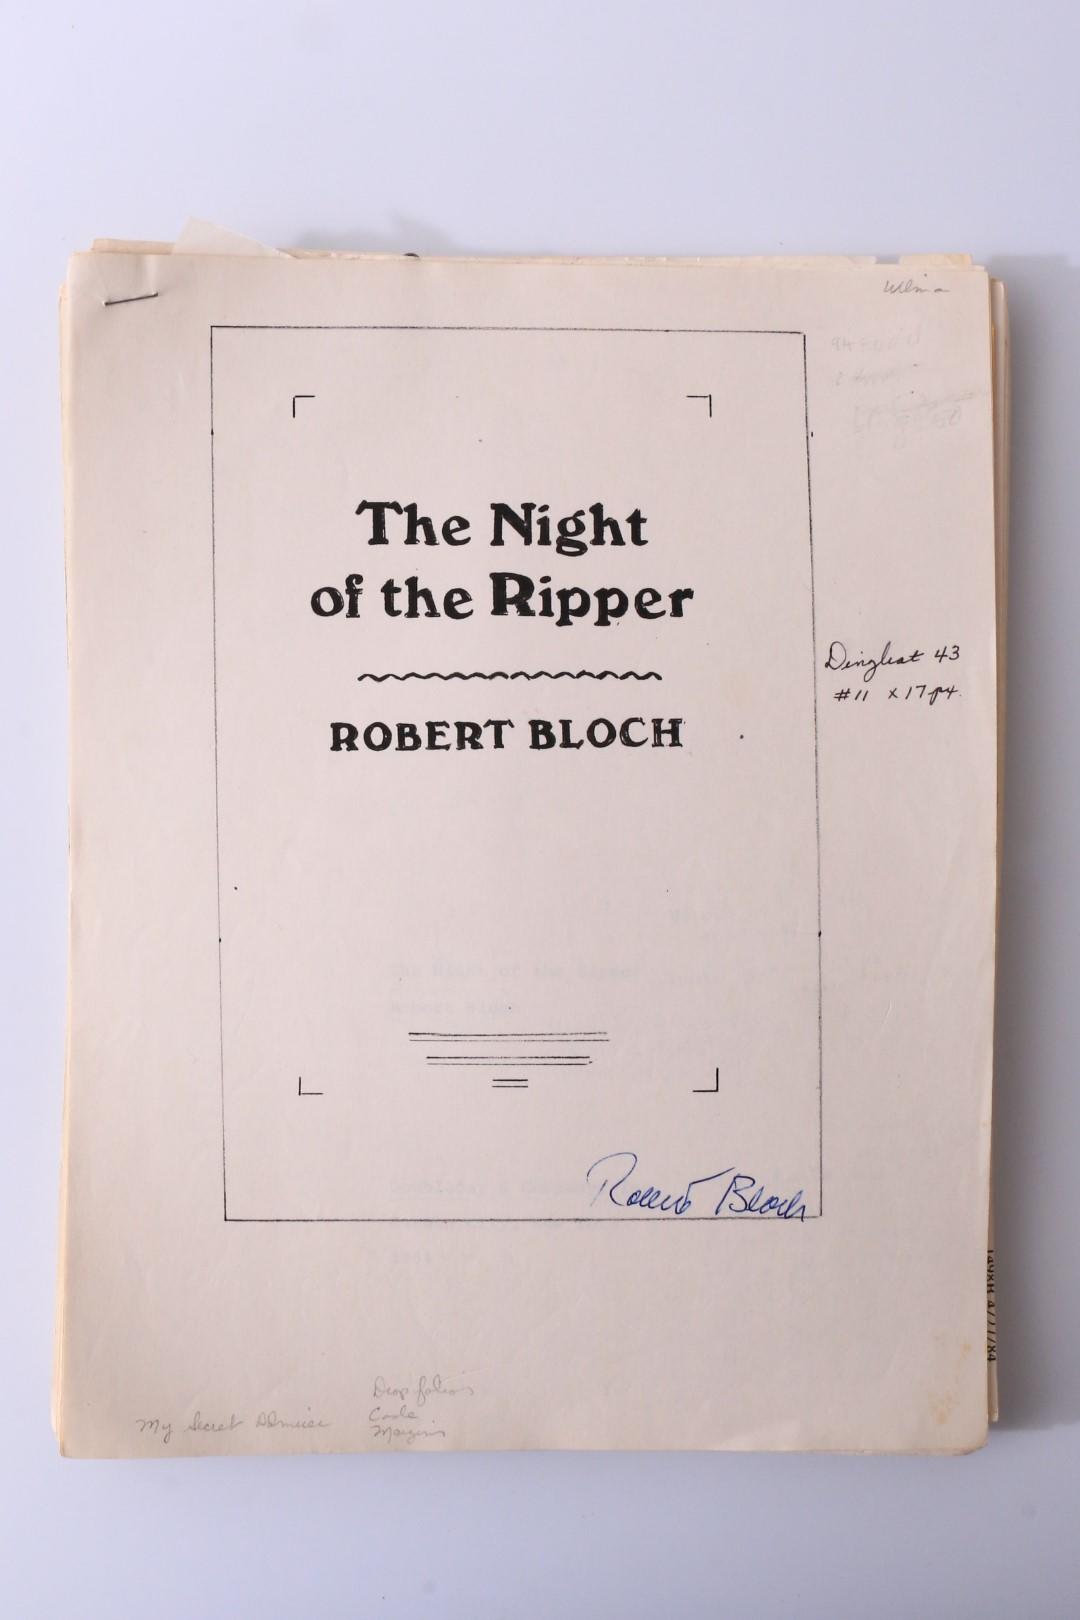 Robert Bloch - The Night of the Ripper MSS and Associated Pieces - Doubleday, 1984, Manuscript. Signed